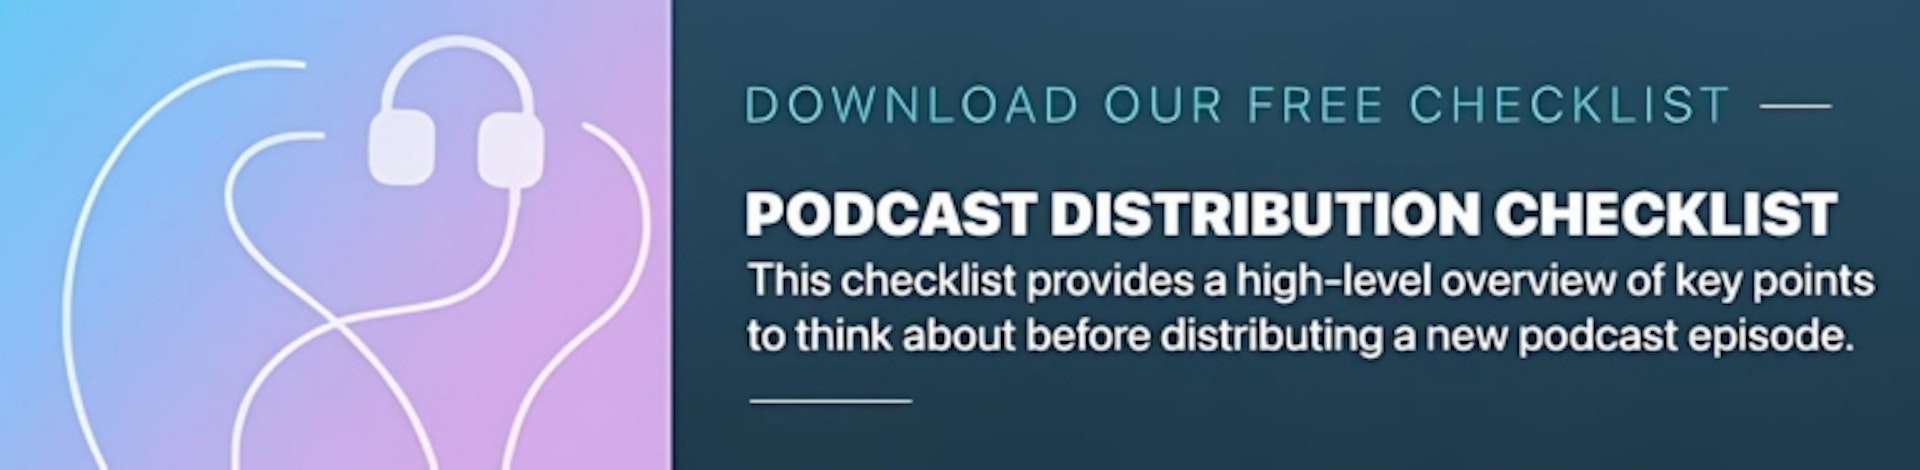 Podcast Distribution Checklist - The Podcast Consultant.